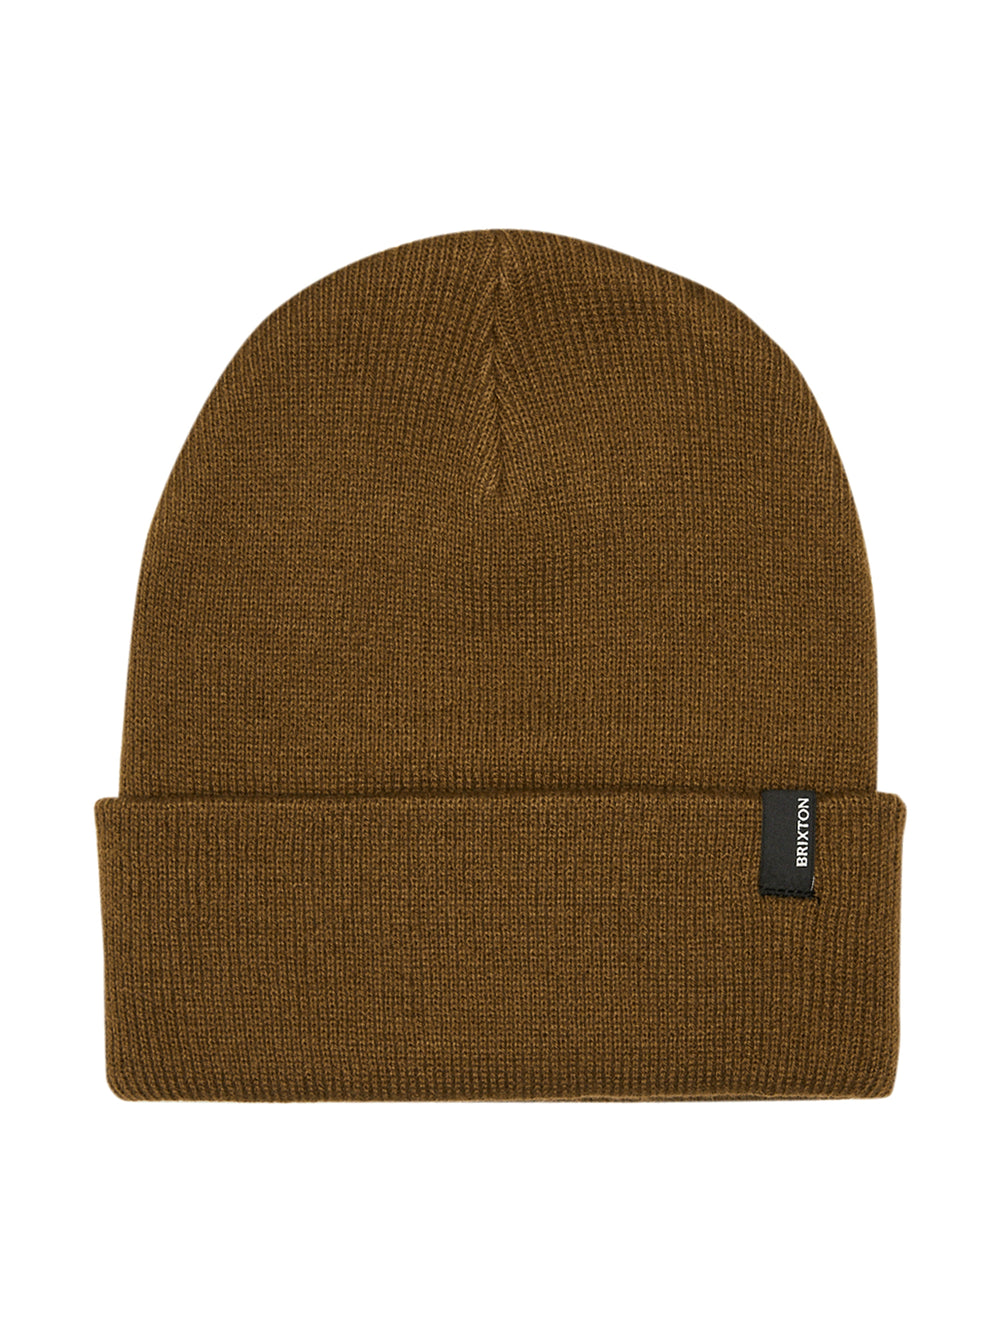 BRIXTON WATCH CAP - COYOTE BROWN - CLEARANCE